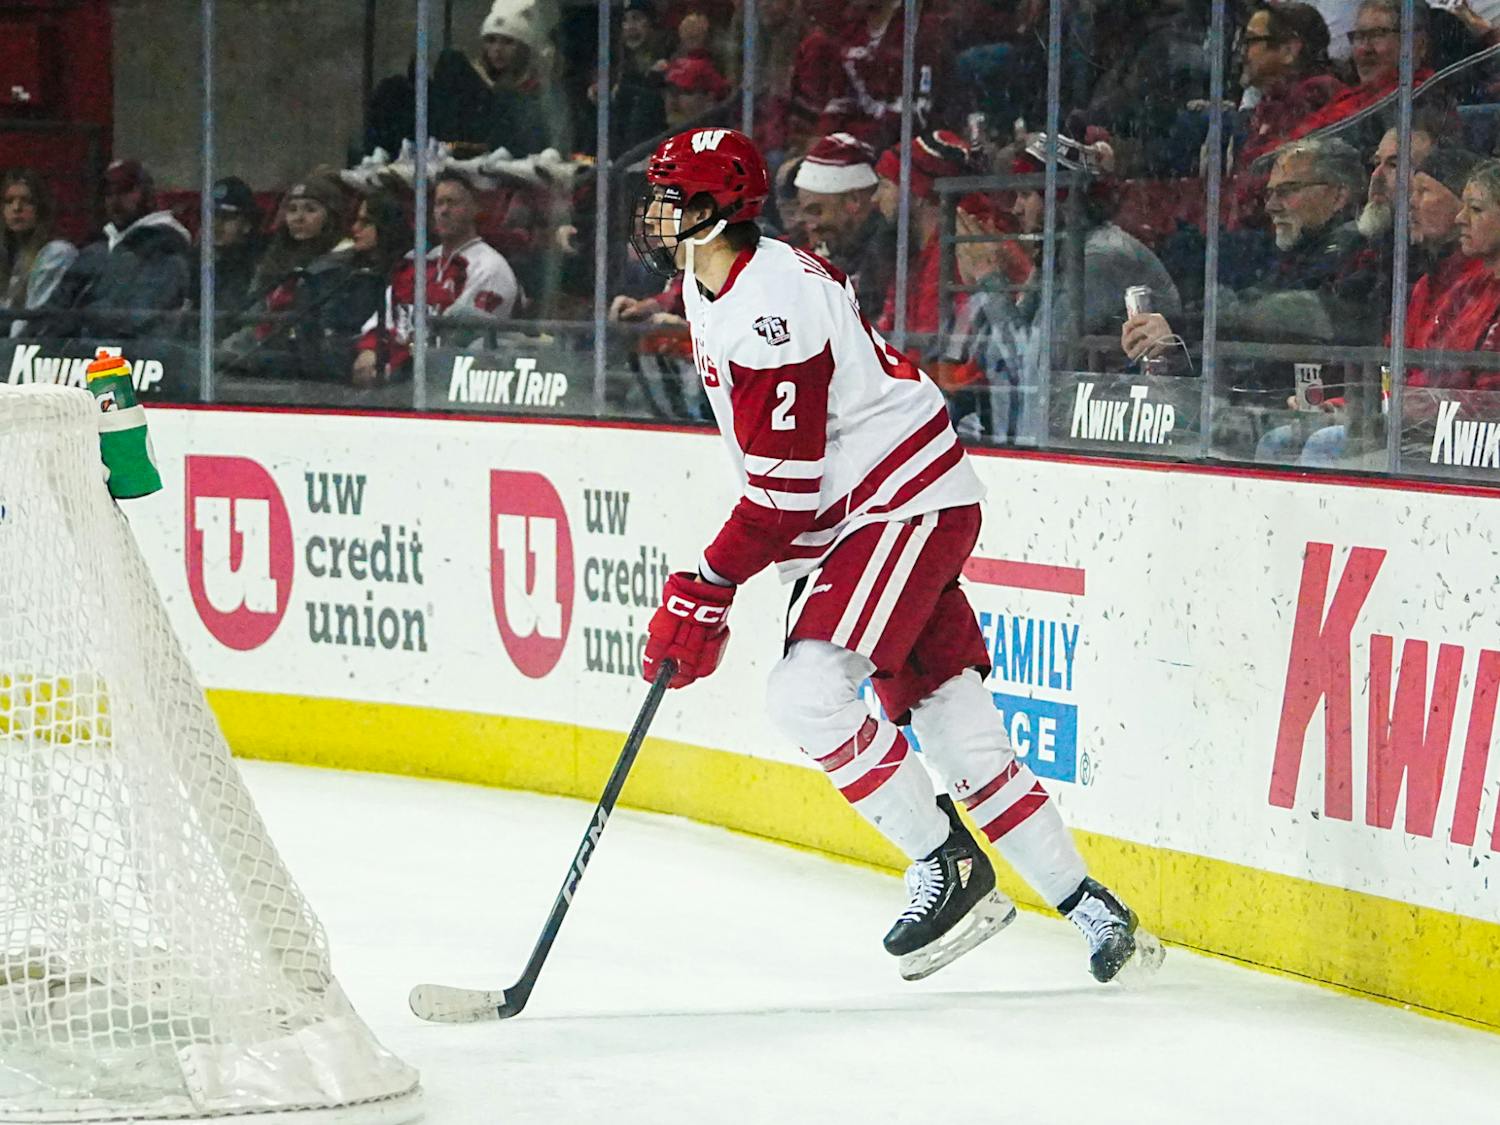 PHOTOS: Badgers find mixed results at home against Lindenwood